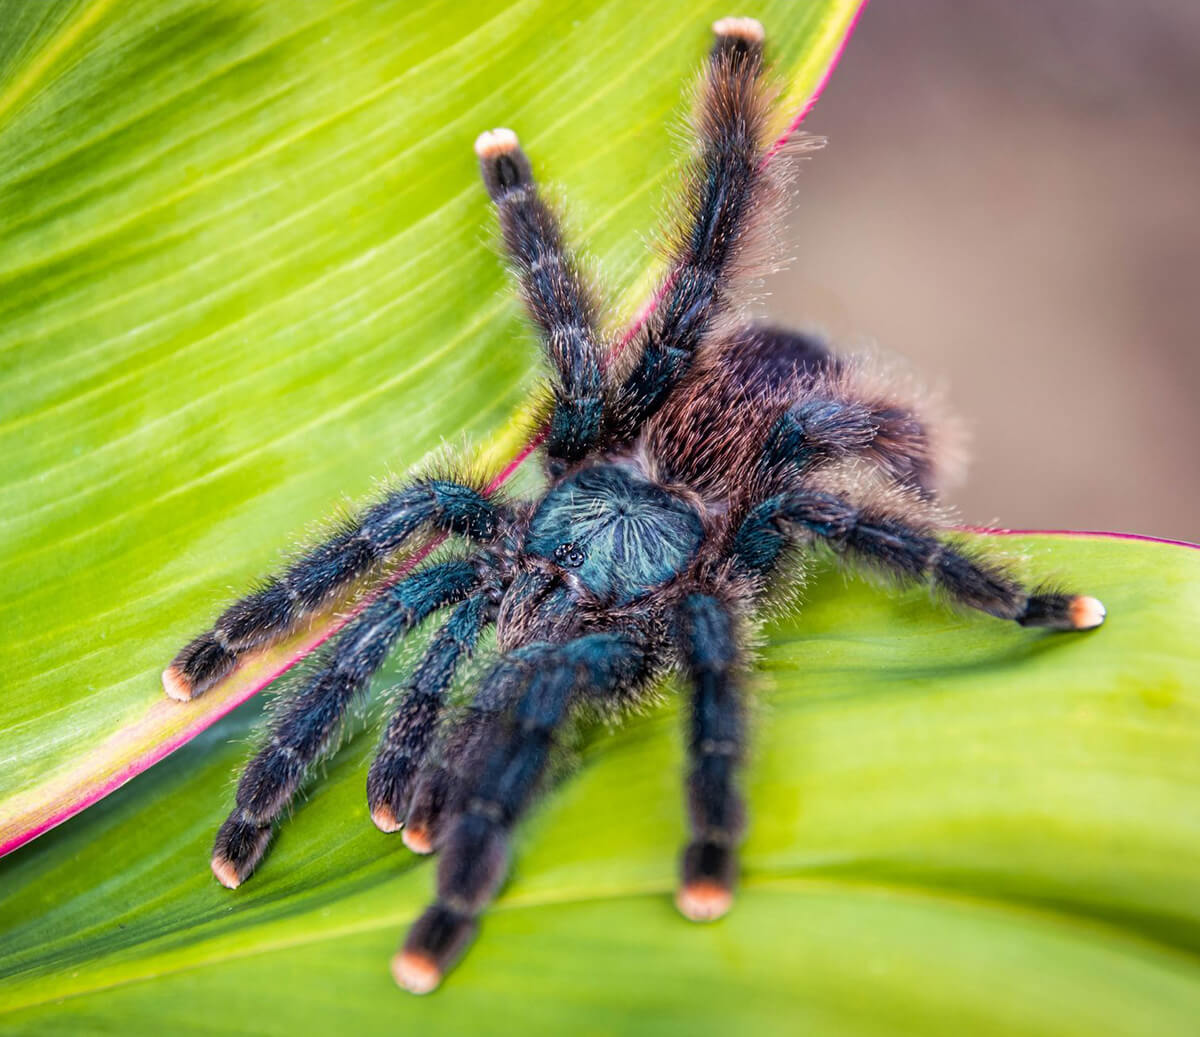 A pink-toed tarantula on two leaves, one of Wonderlab's animal exhibits